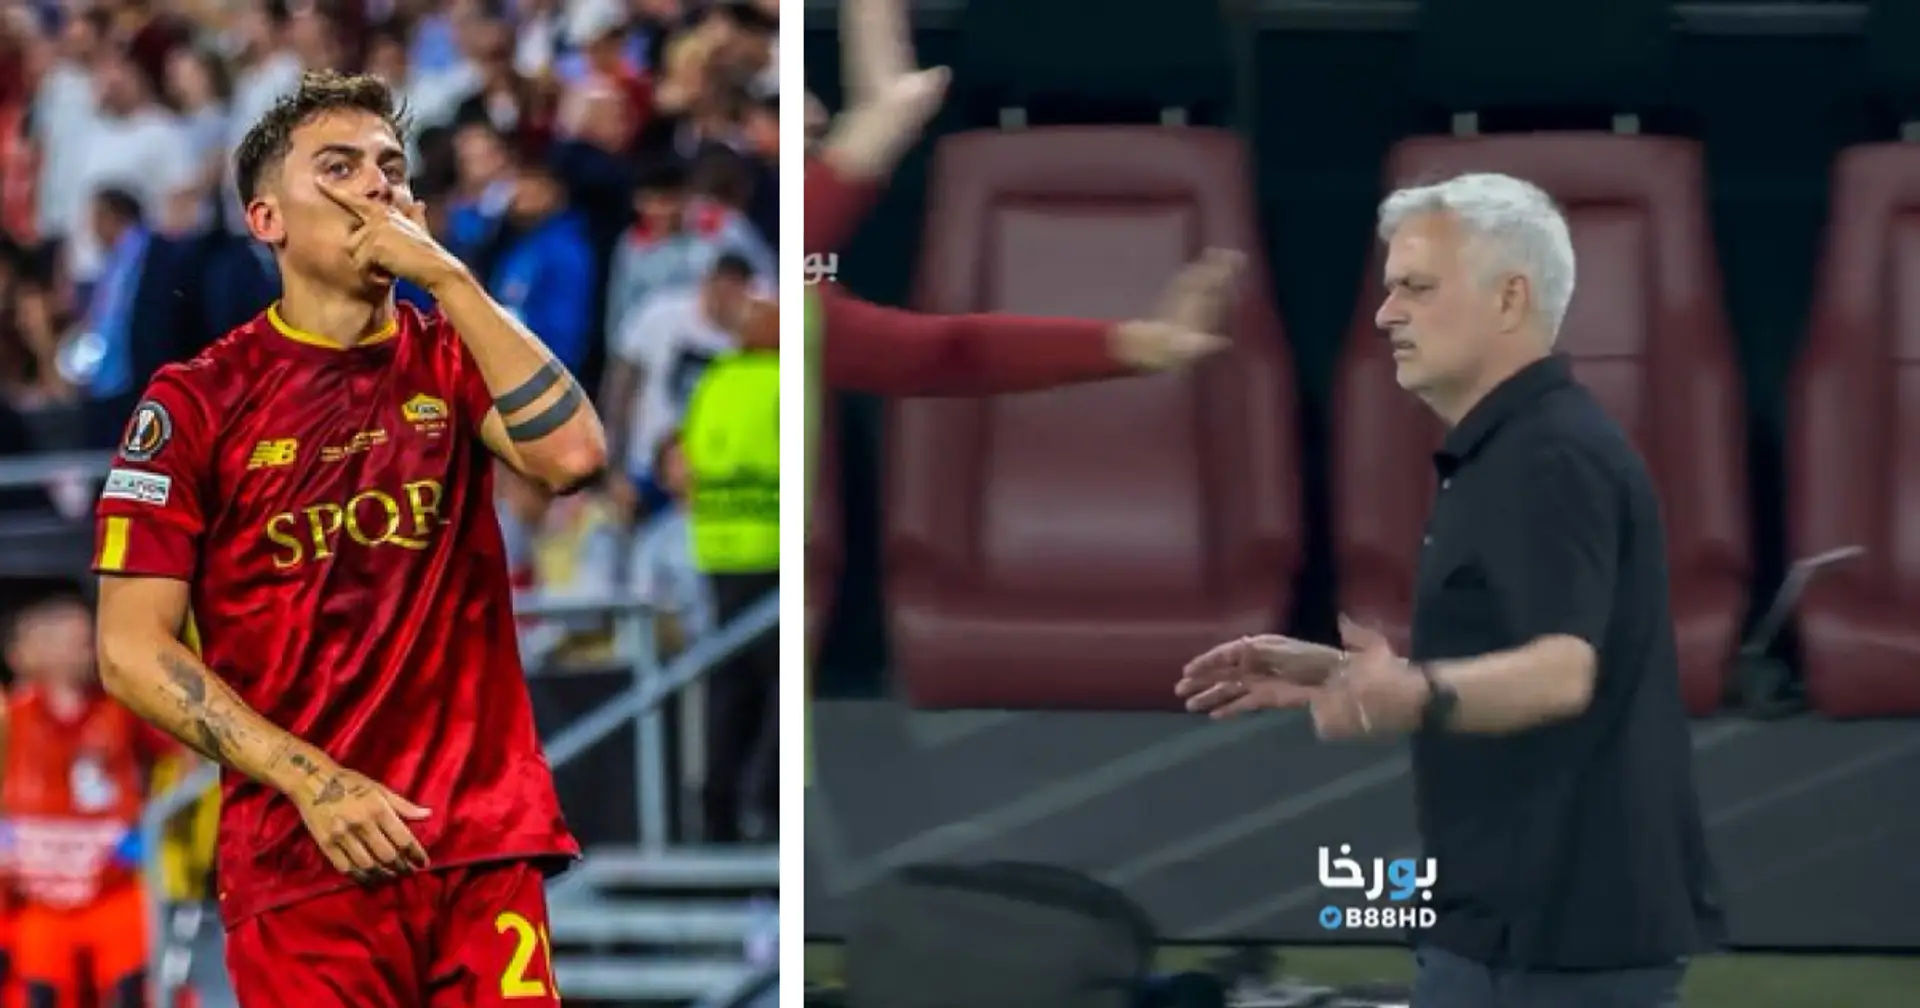 Jose Mourinho's reaction to AS Roma goal in European final spotted - he's already done it before